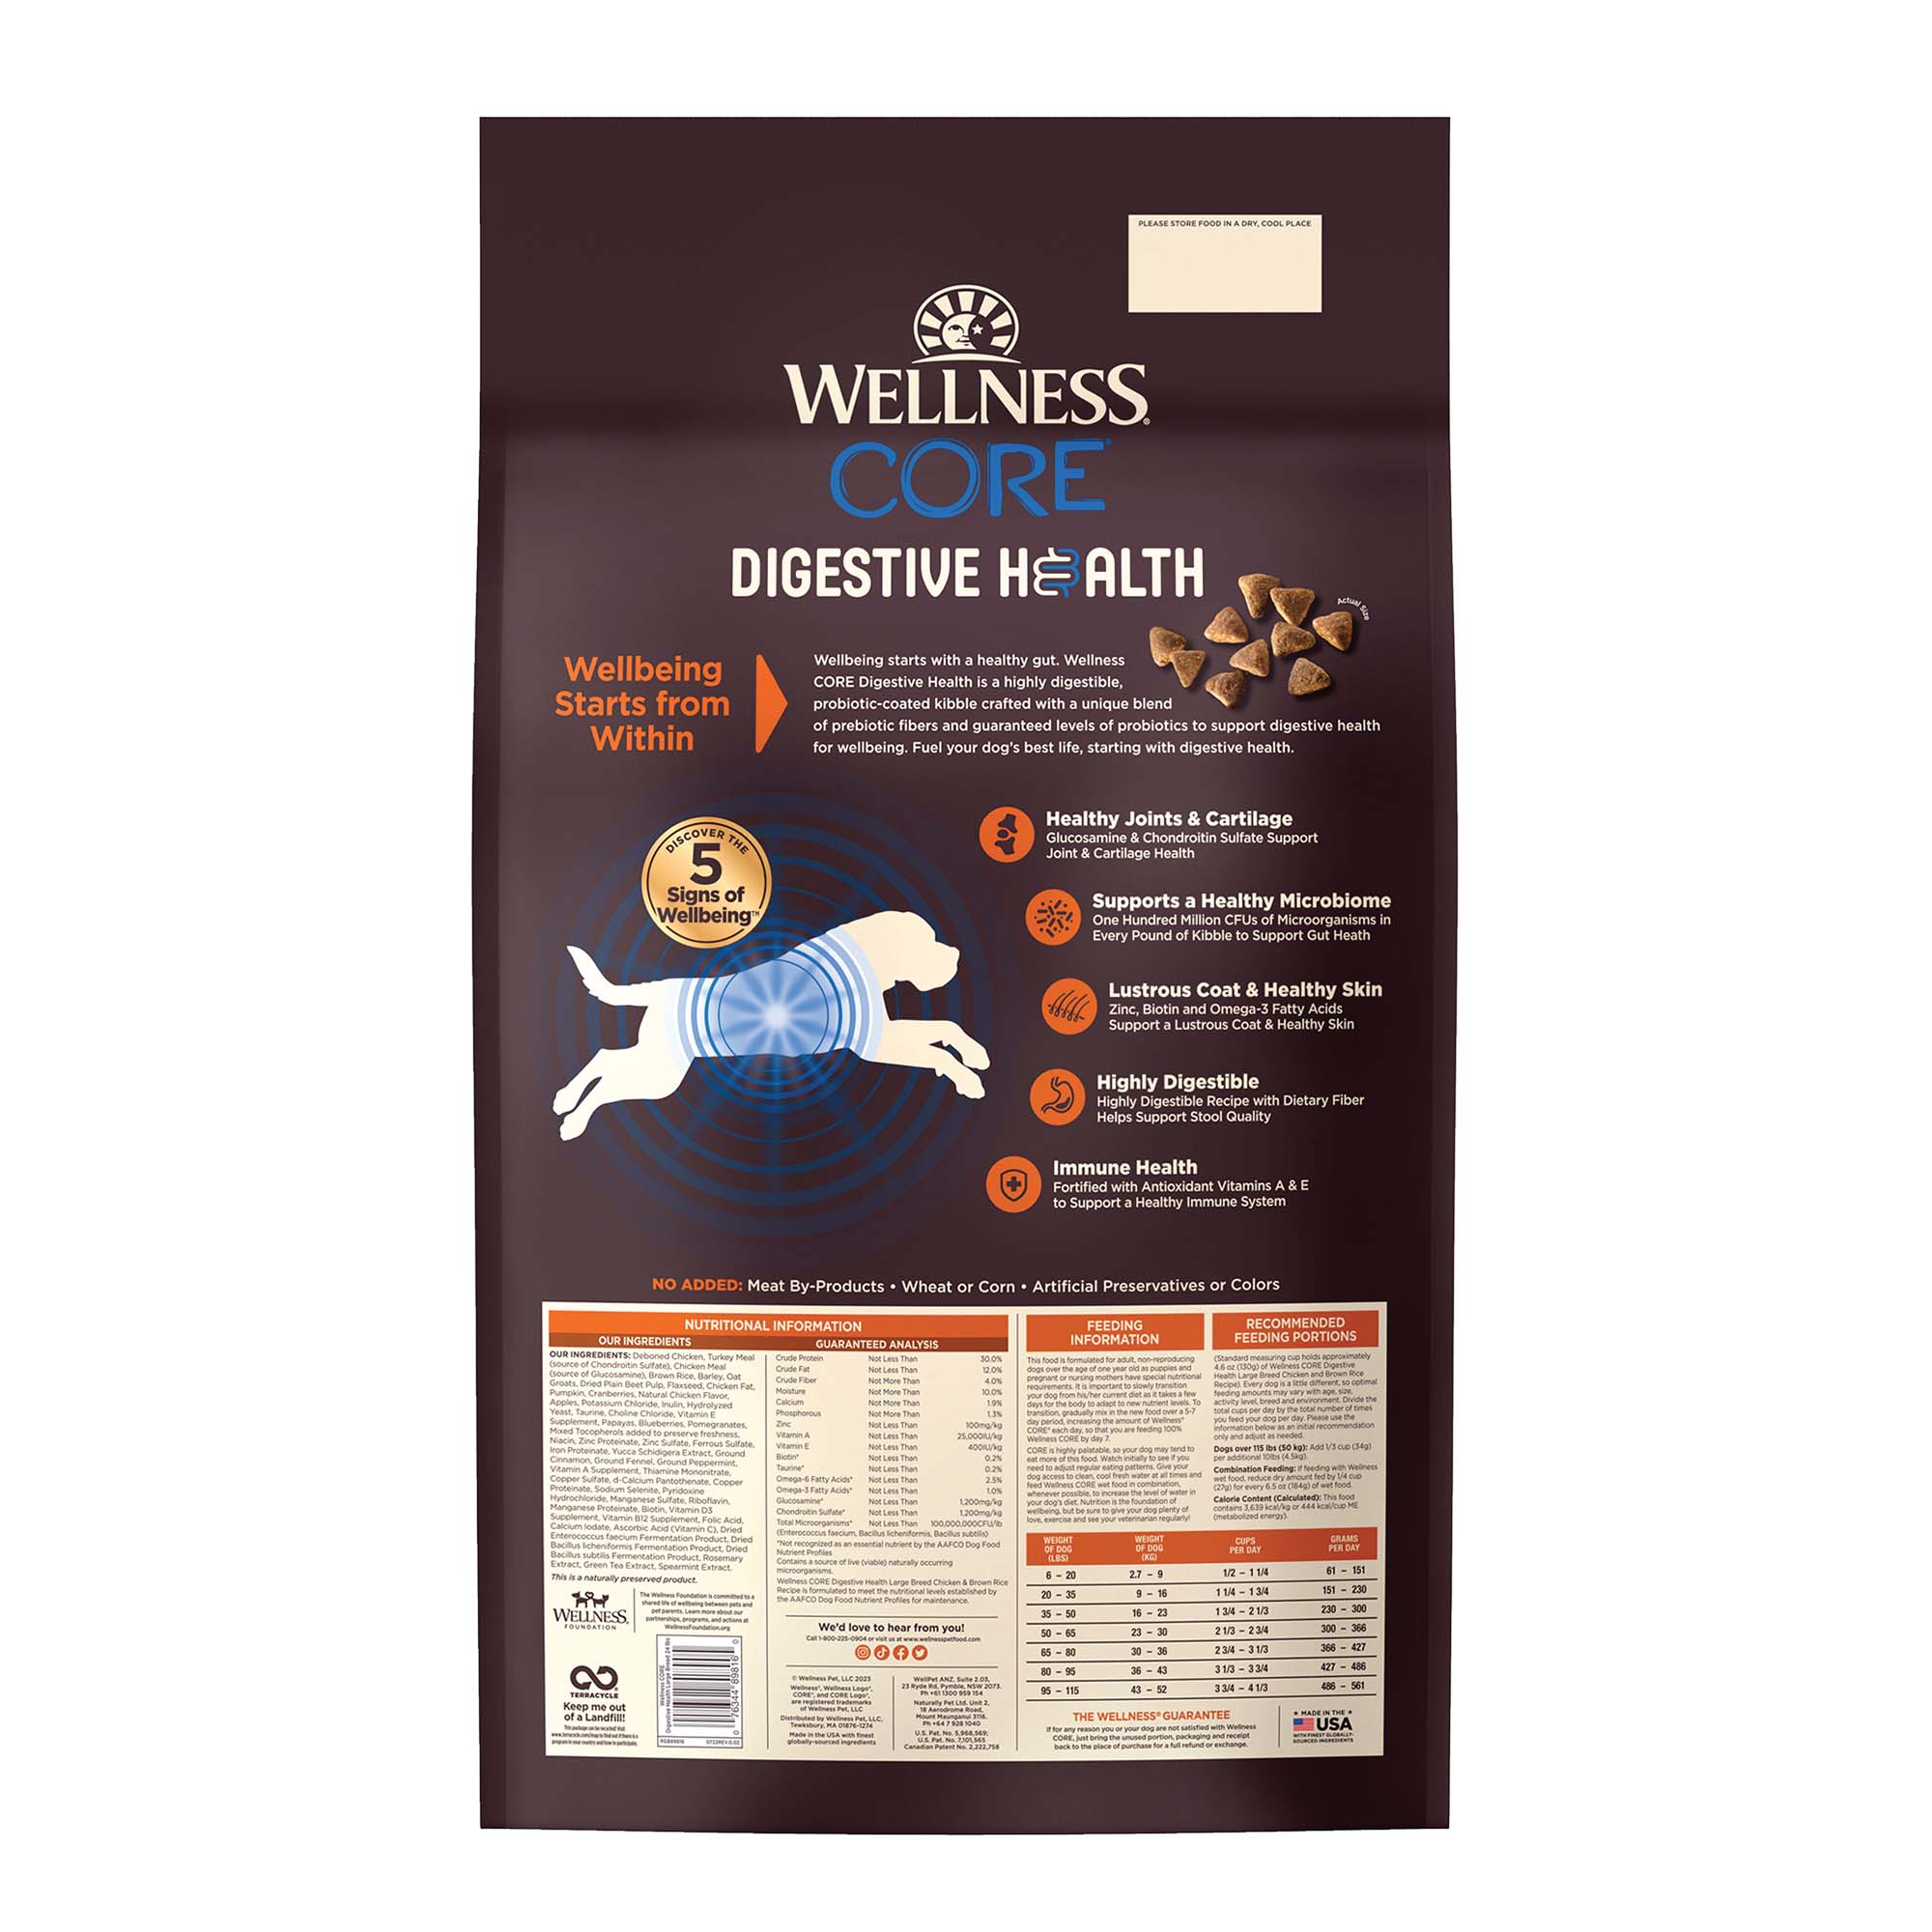 Wellness CORE Digestive Health Large Breed Chicken & Brown Rice